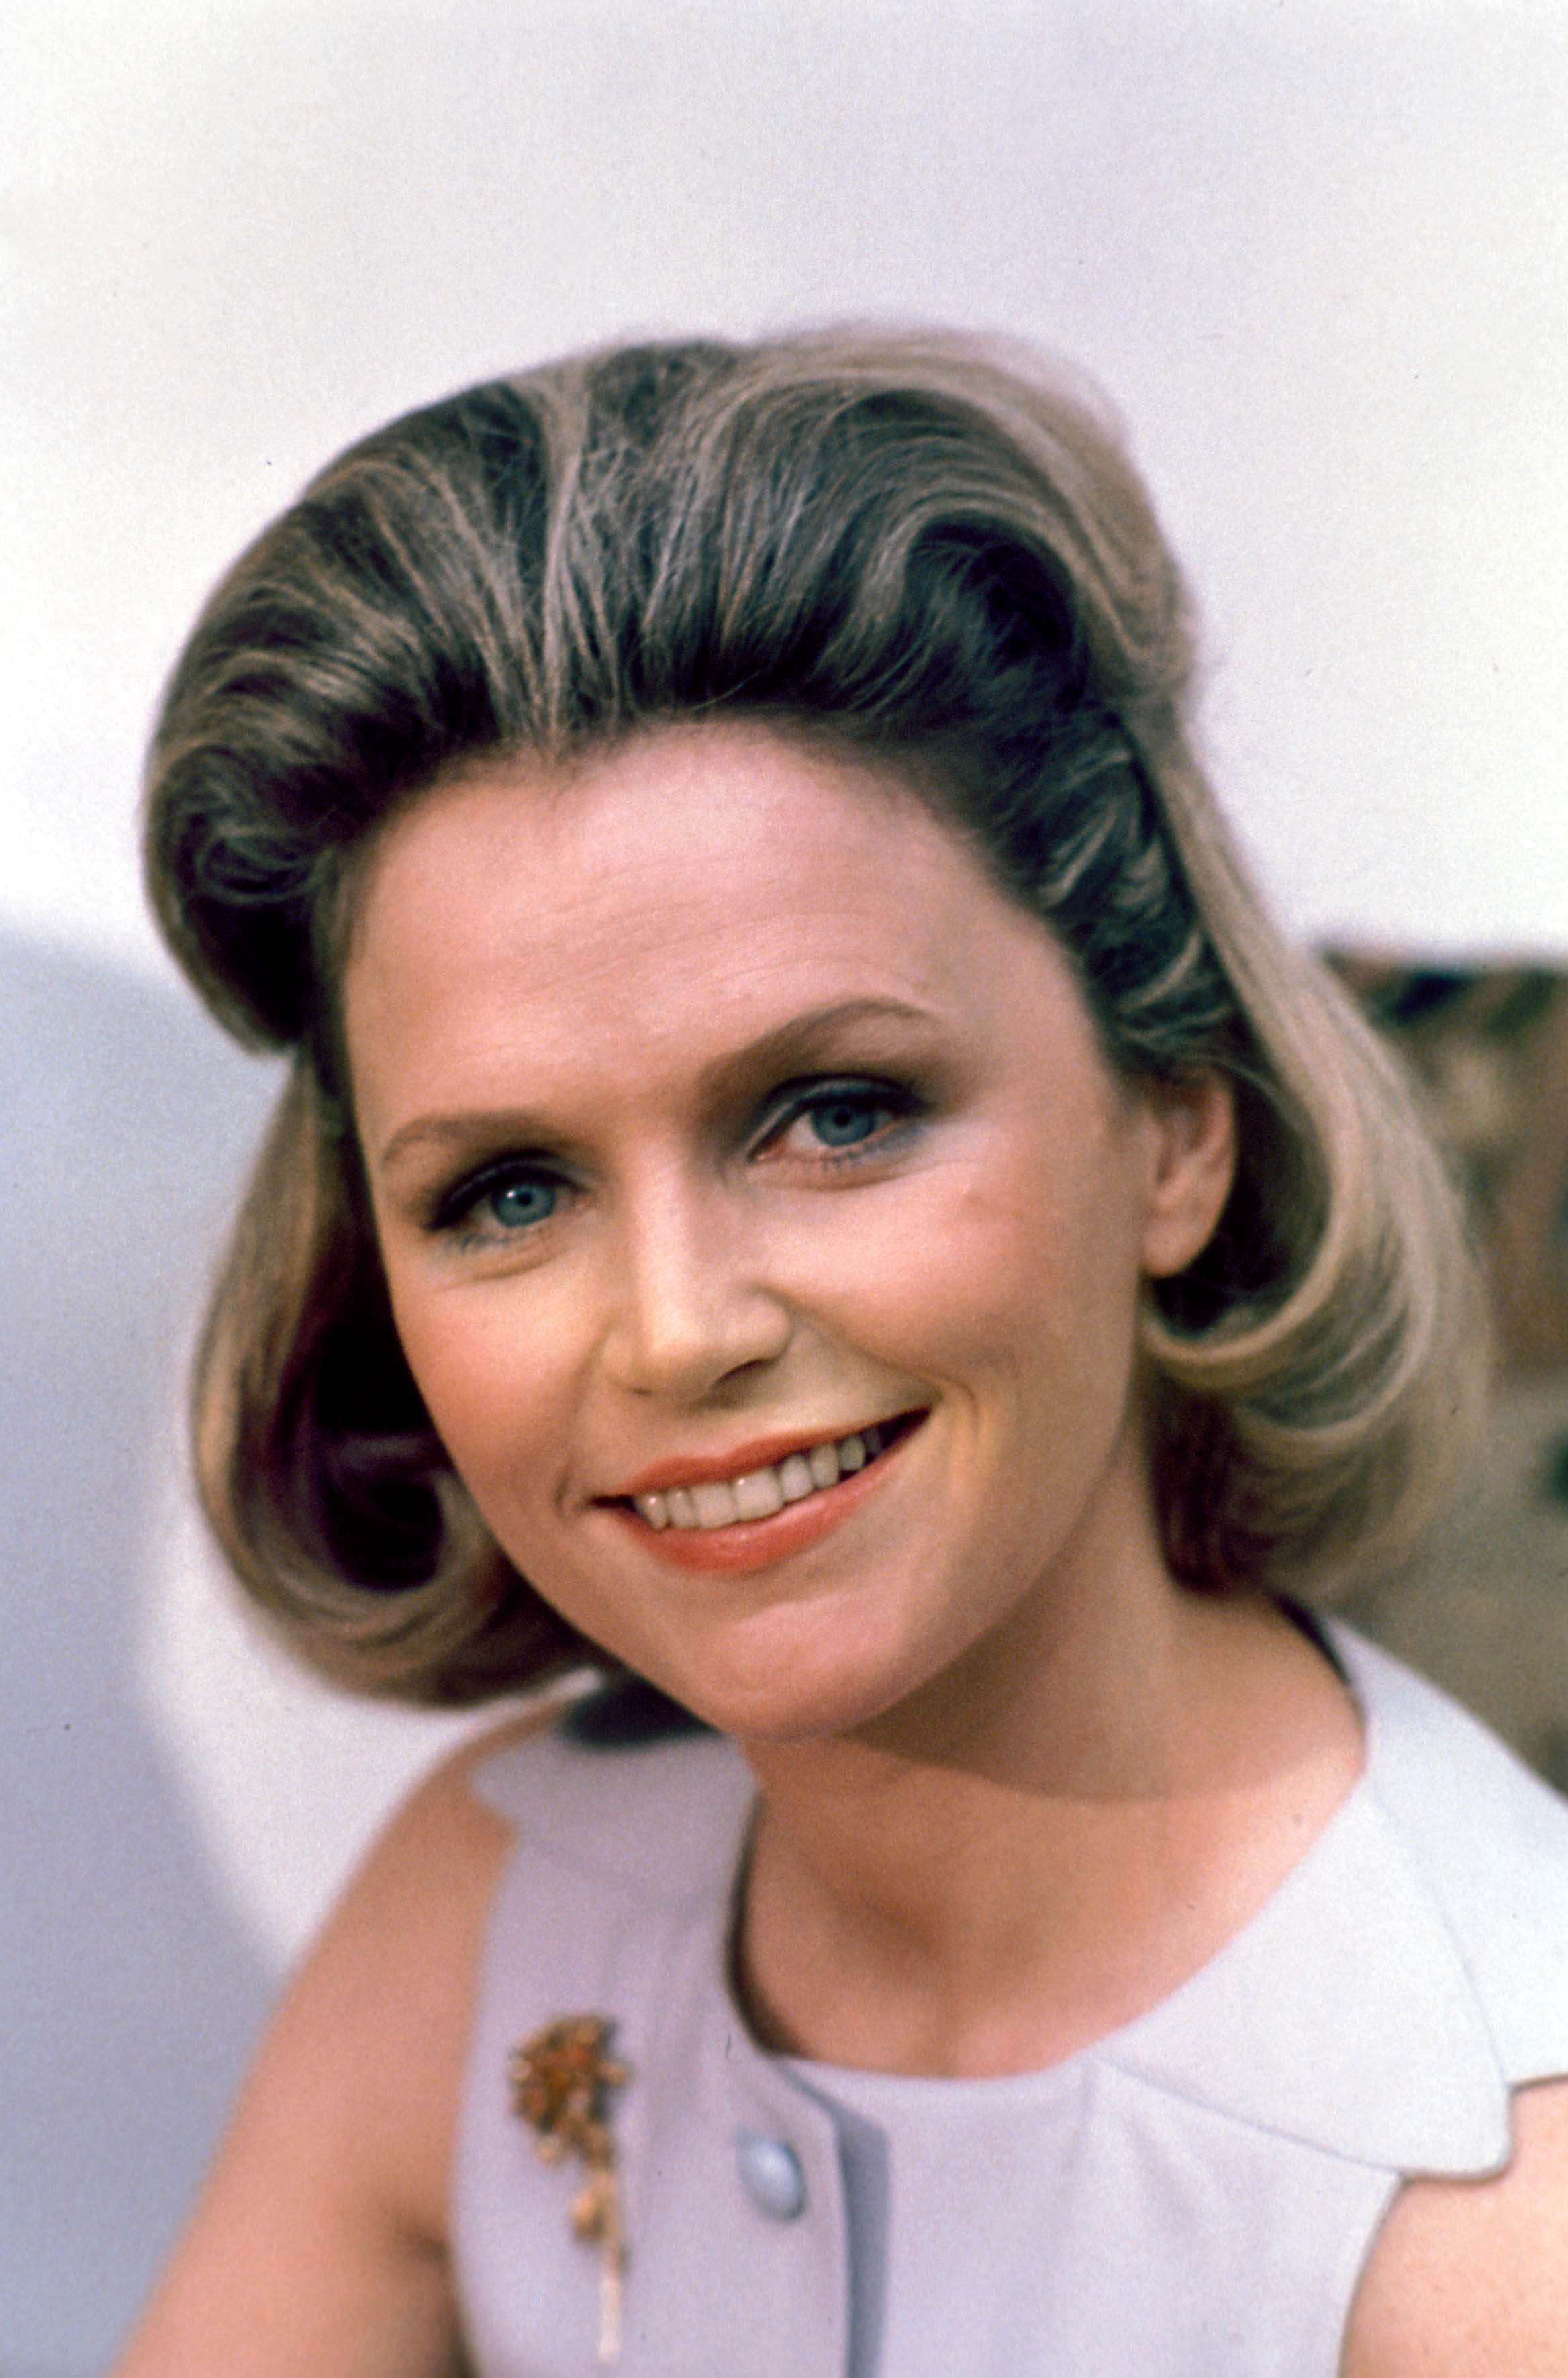 More Pictures Of Lee Remick. images of lee remick. 